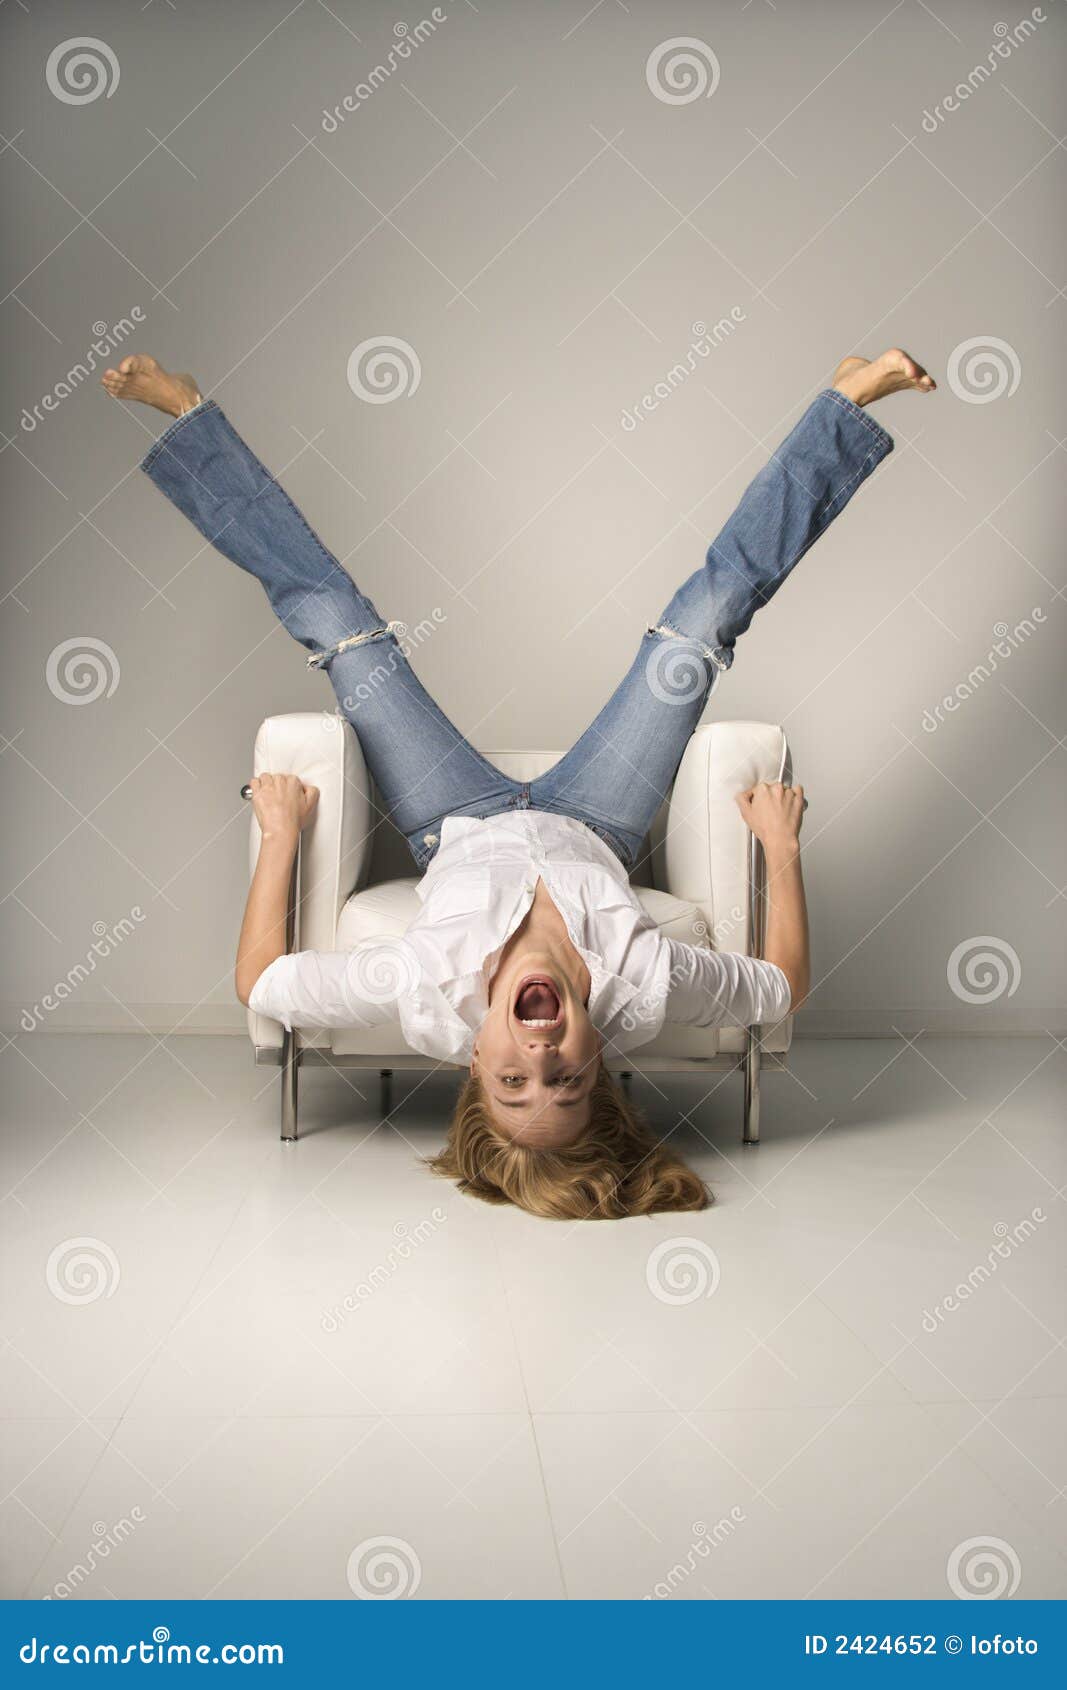 Woman Upside Down In Chair Stock Photo Image Of Vertical Blue